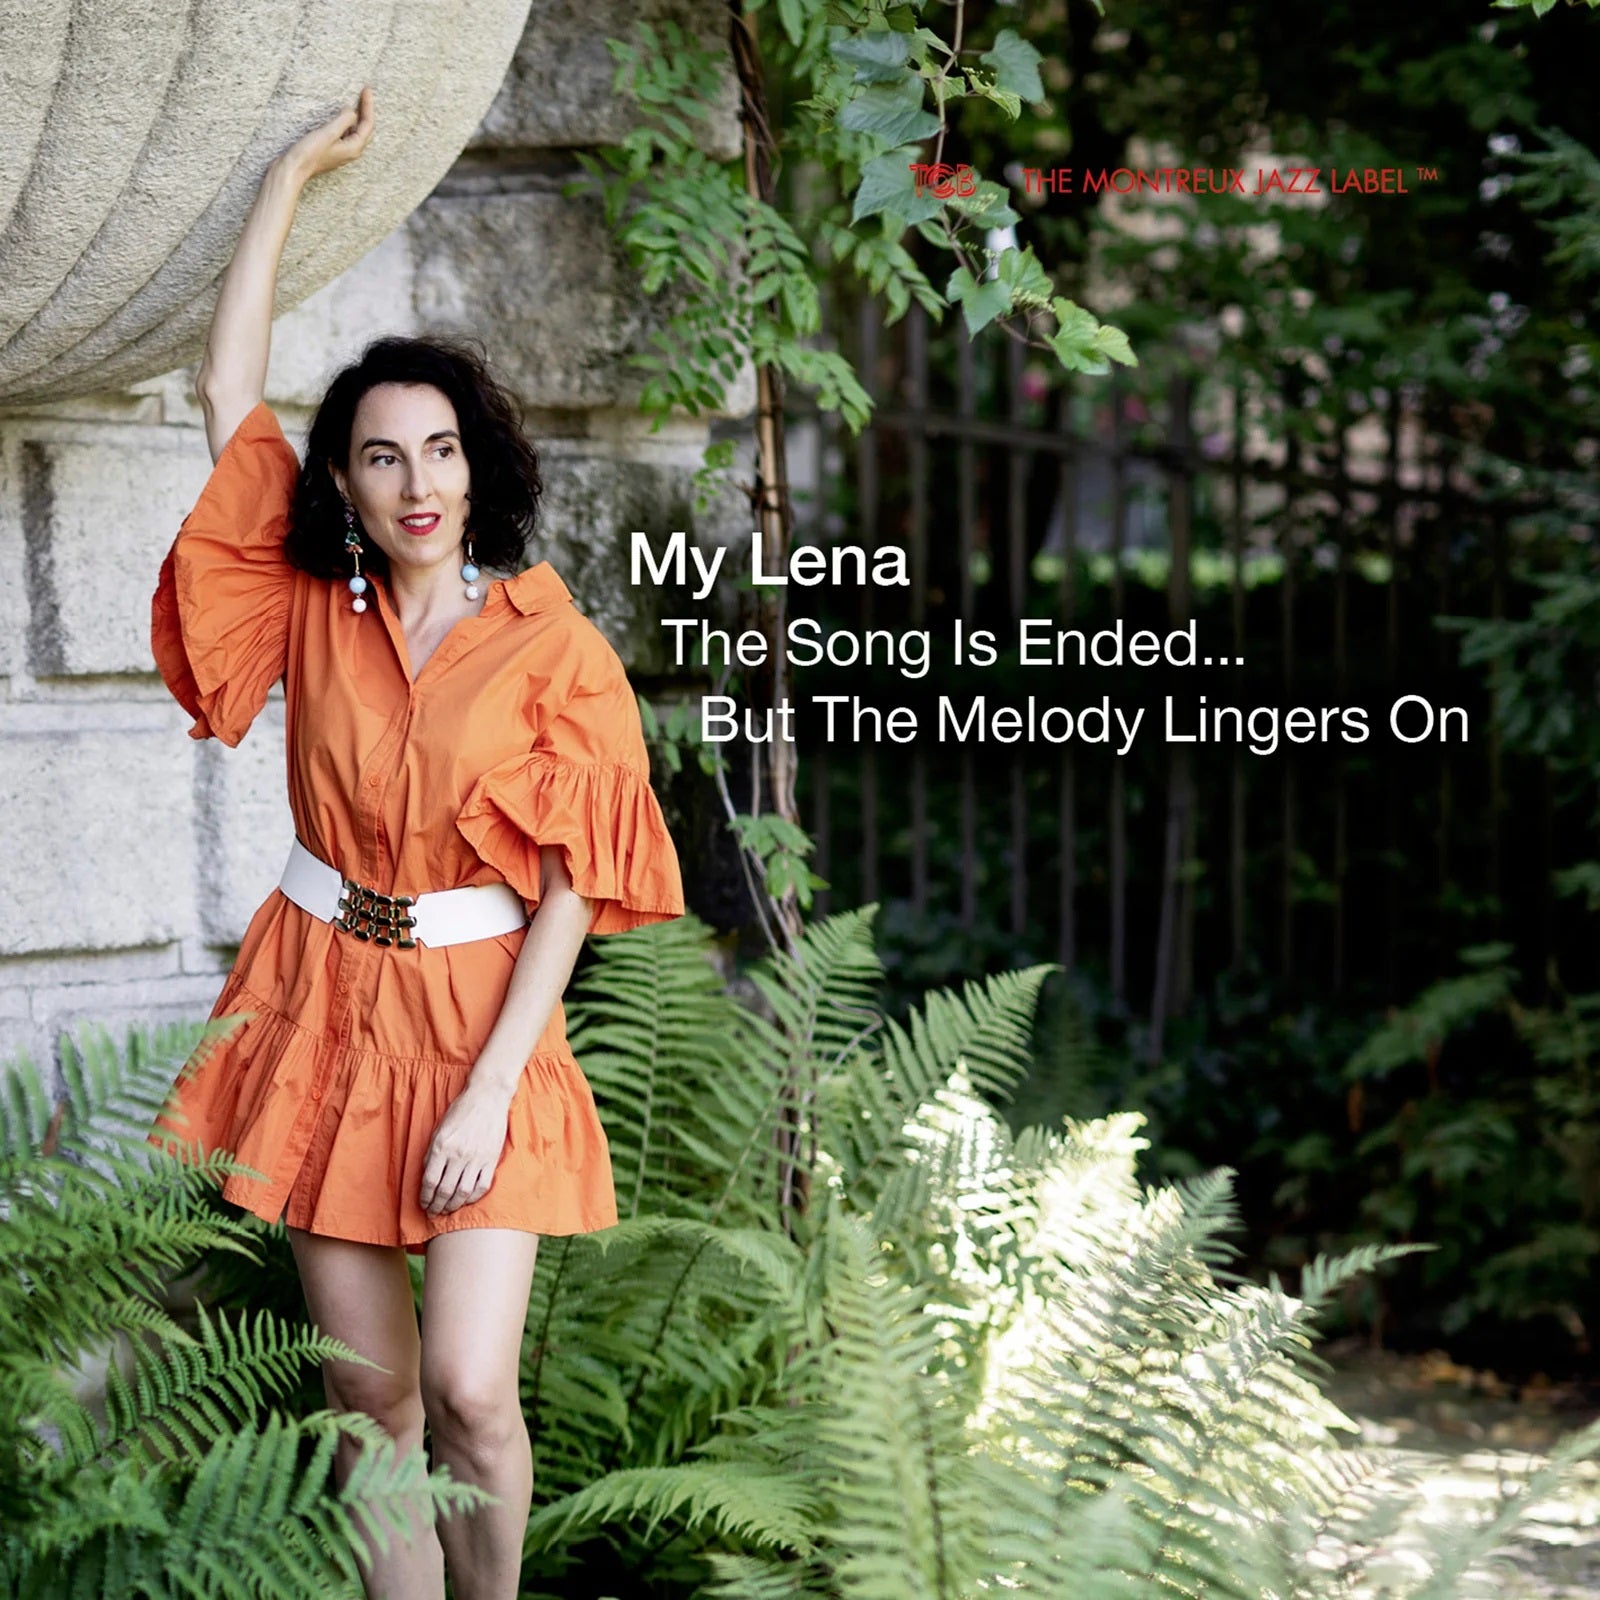 The Song Is Ended…But The Melody Lingers On - Songs of Irving Berlin/ My Lena